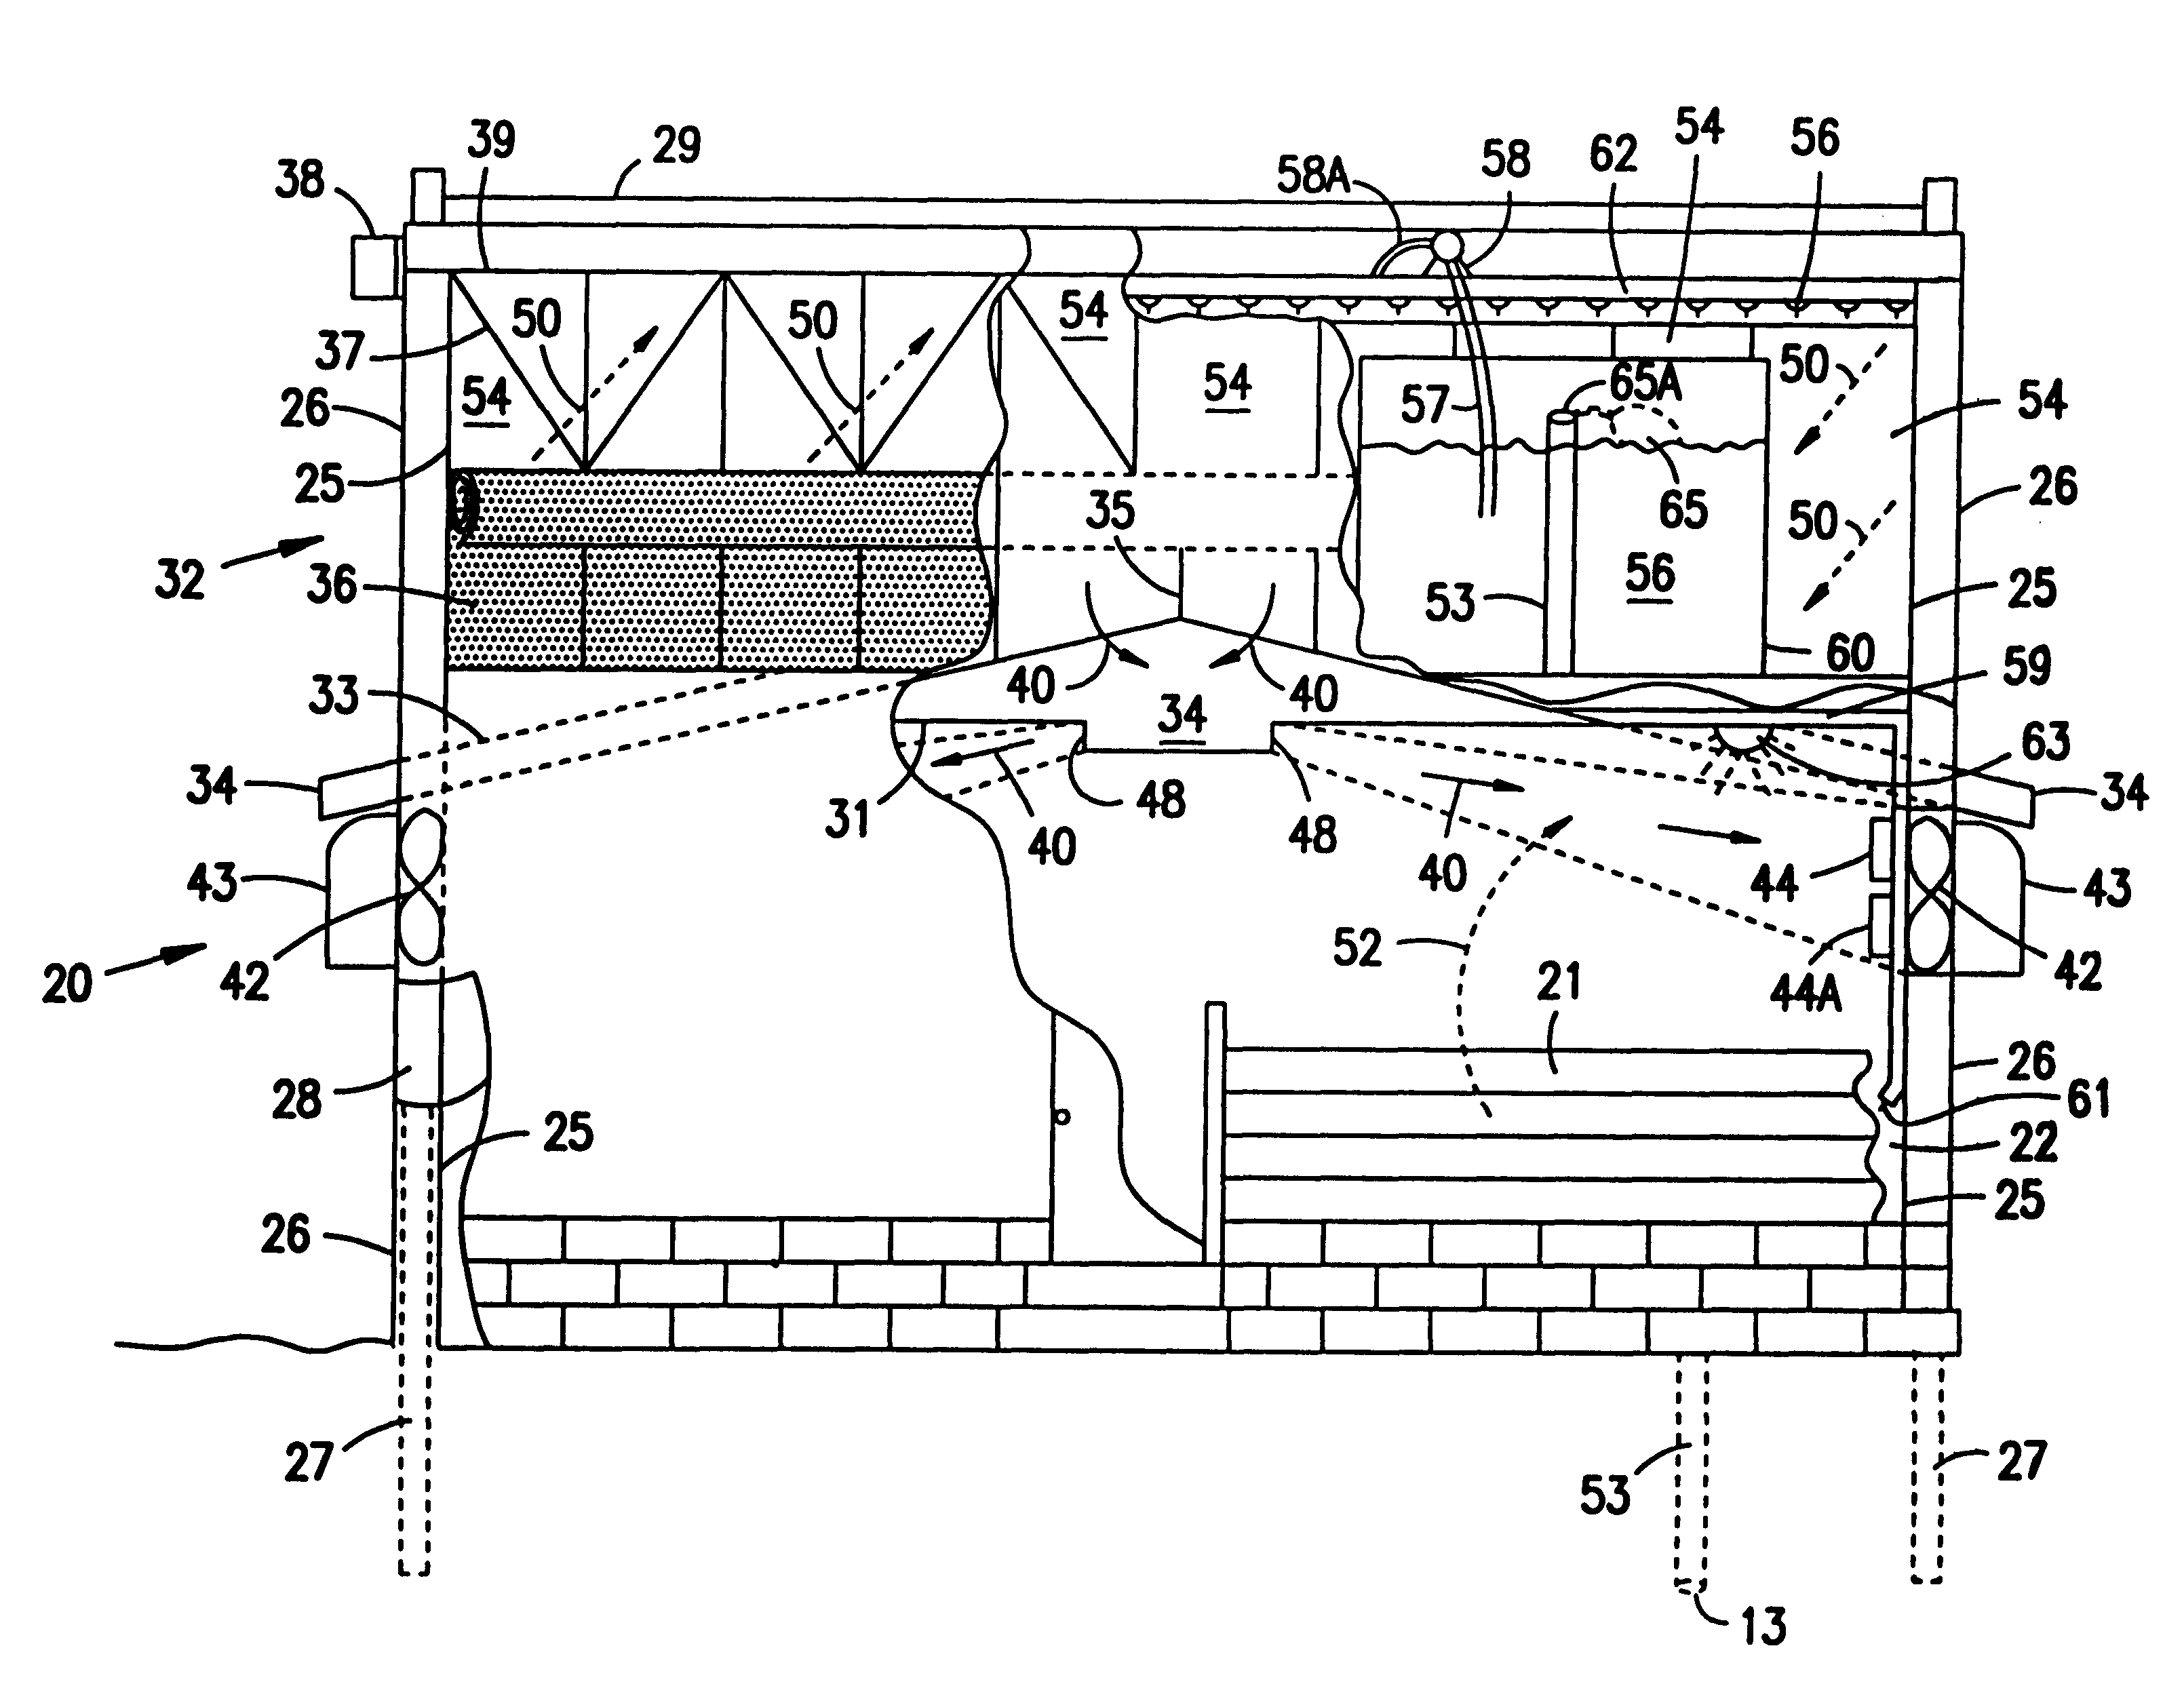 Animal confinement shelter with accelerated decomposition of waste